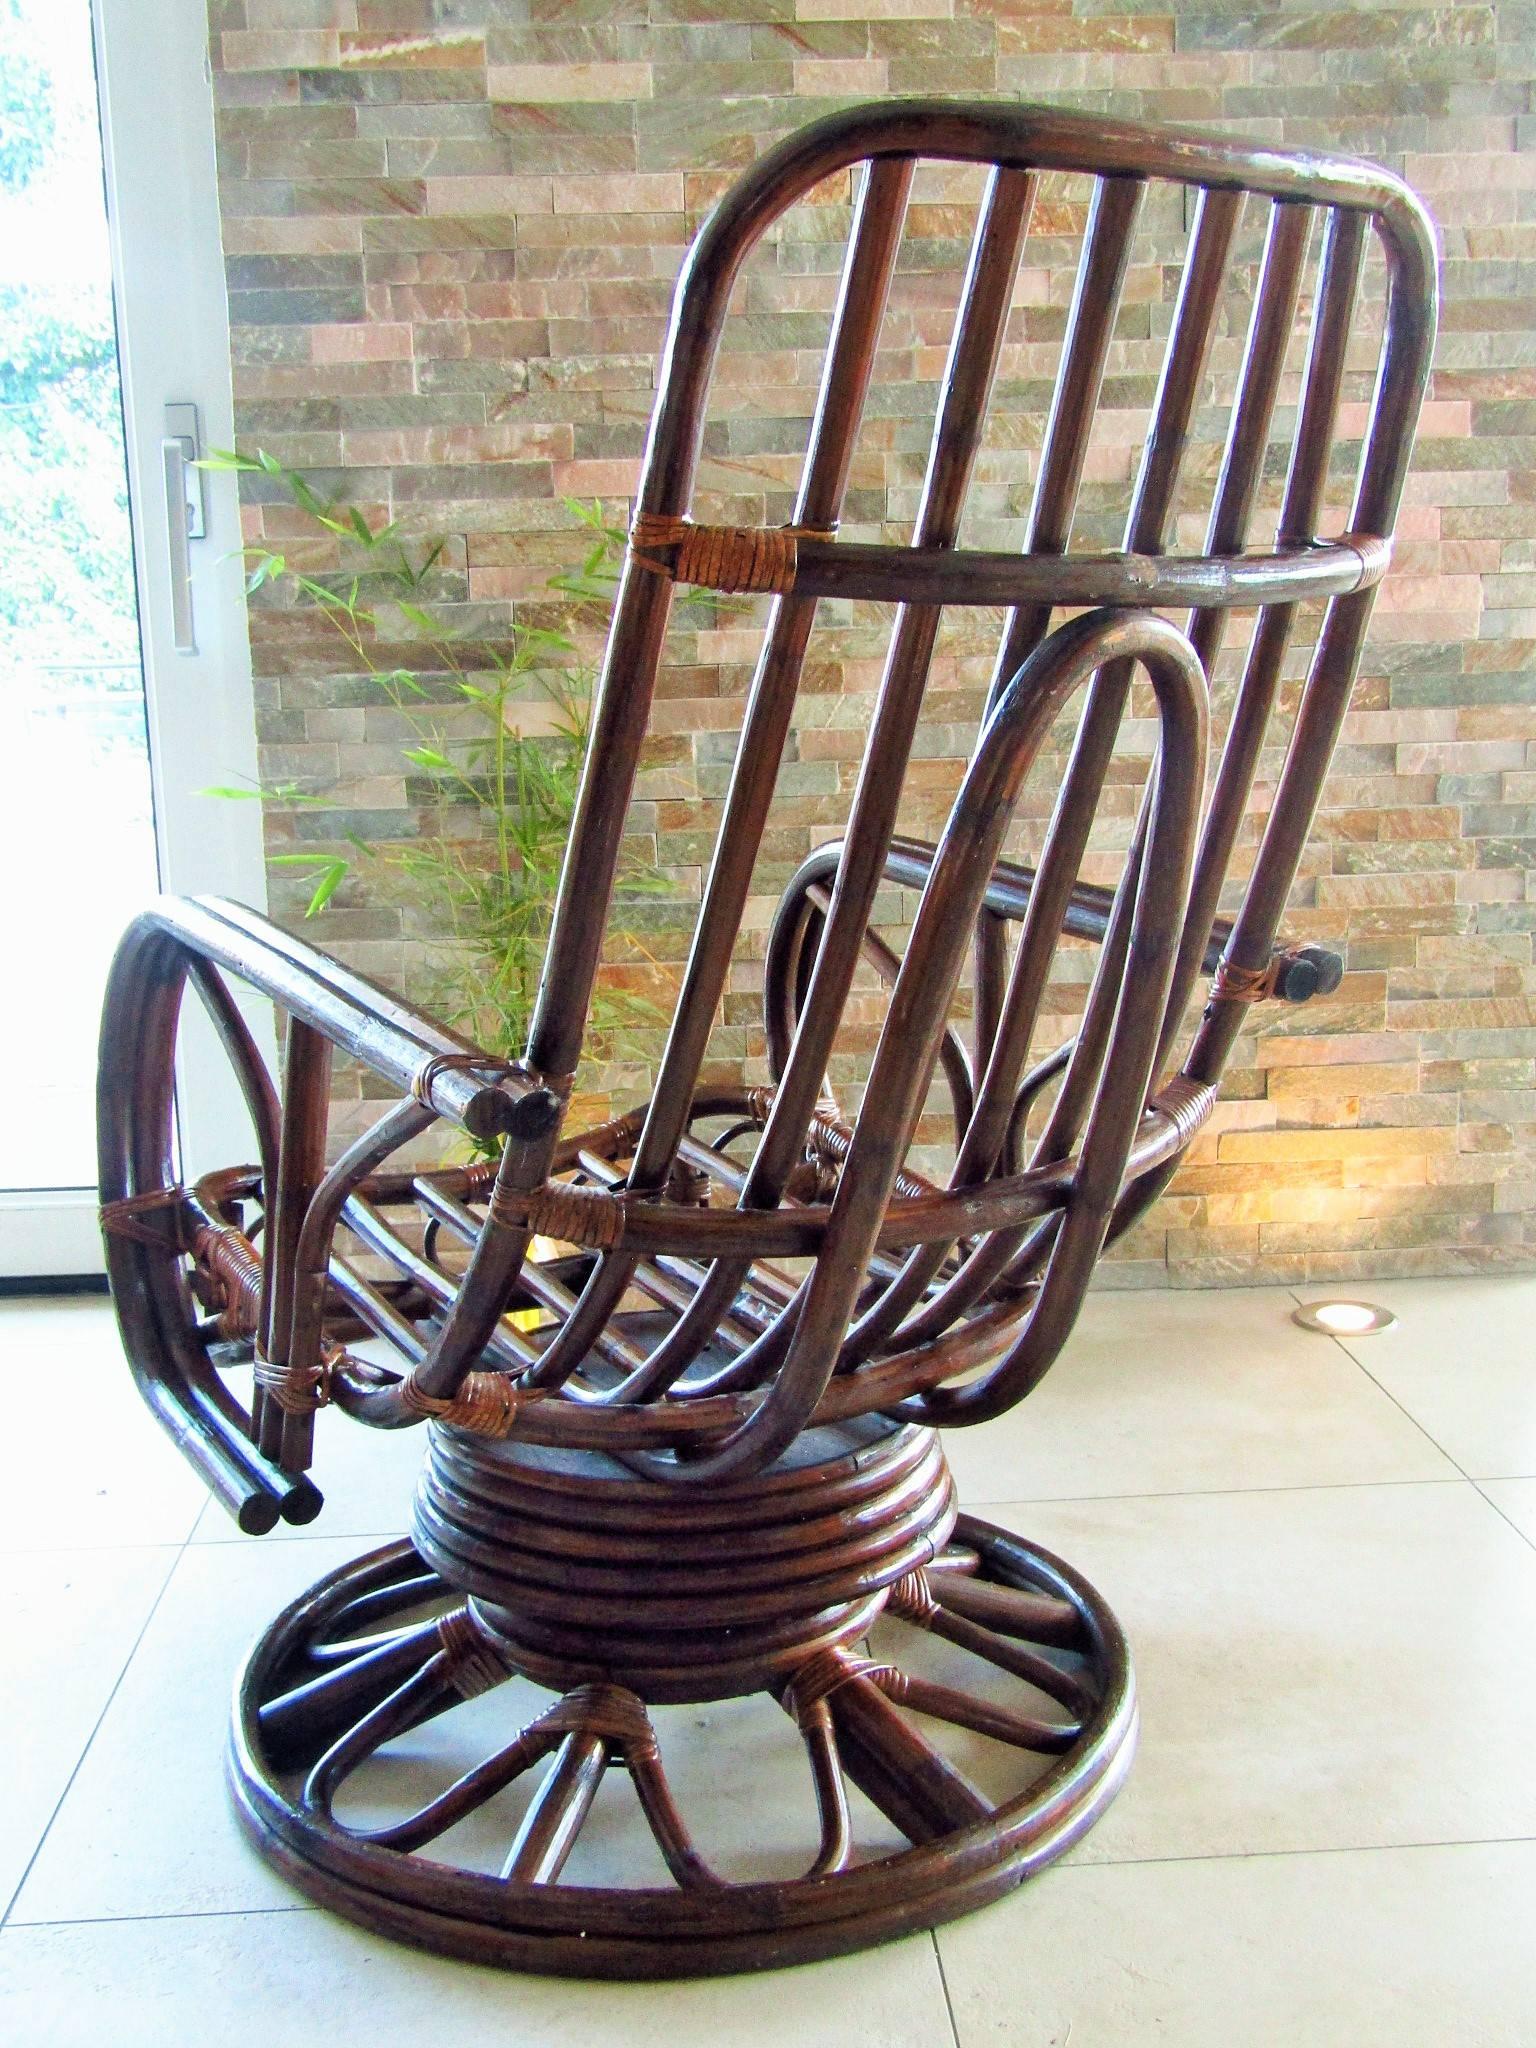 Midcentury rattan cane swivel rocking chair, France, 1960s. Please see detail picture of the rocking mechanism. Large spiral springs in the foot make this chair rocking. Very relaxed seating!
Very good vintage condition. No breaks, stabile. Not